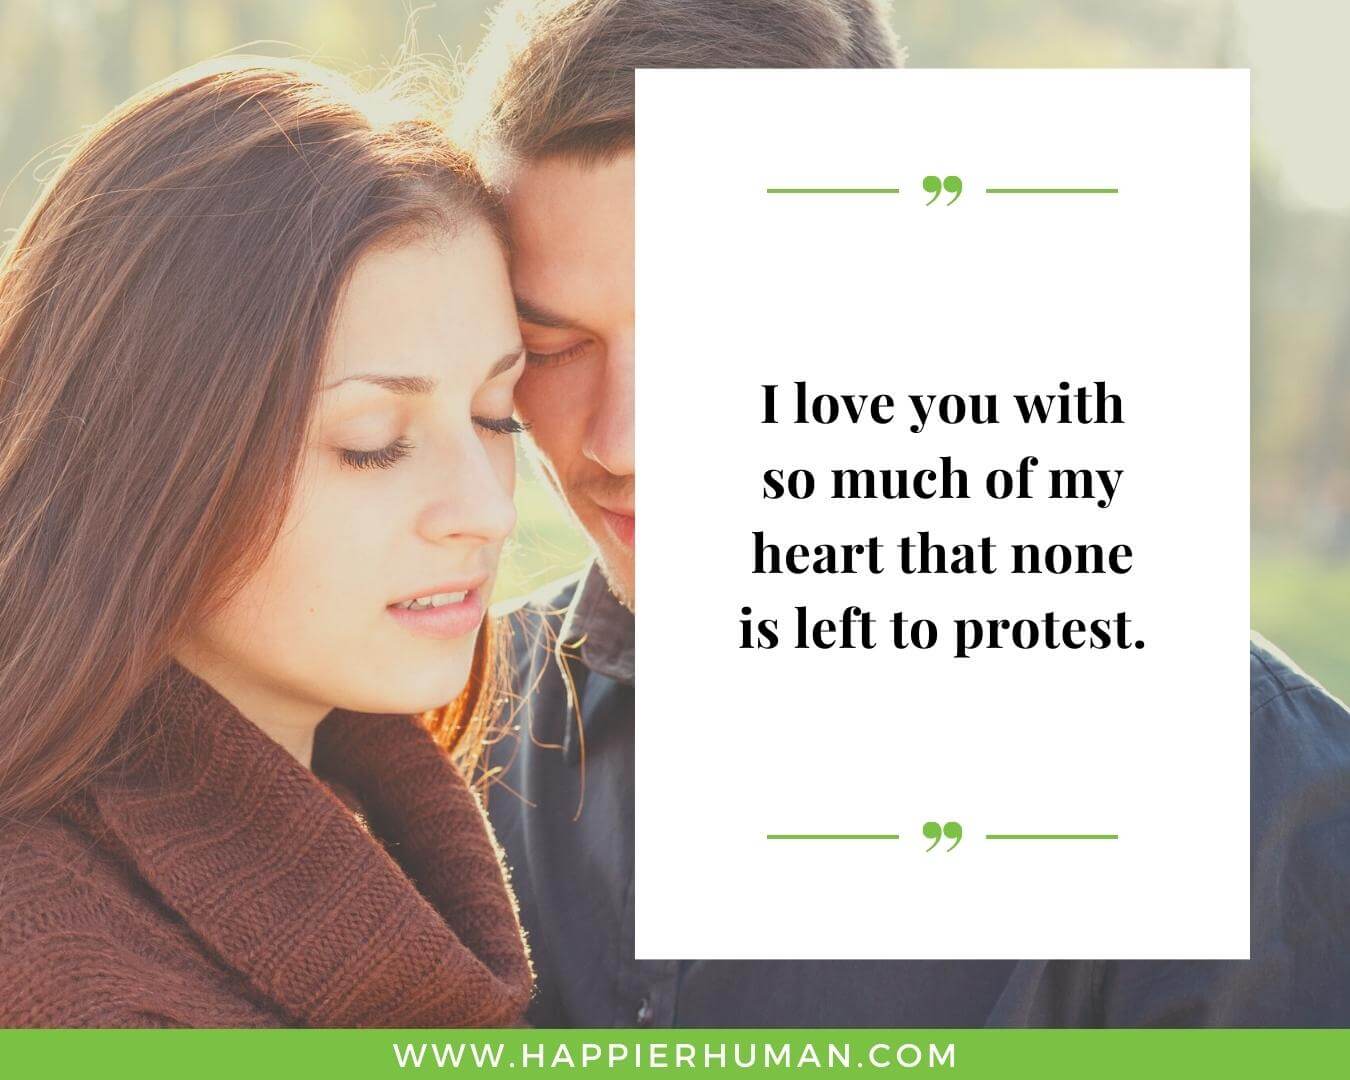 Unconditional Love Quotes for Her - “I love you with so much of my heart that none is left to protest.”